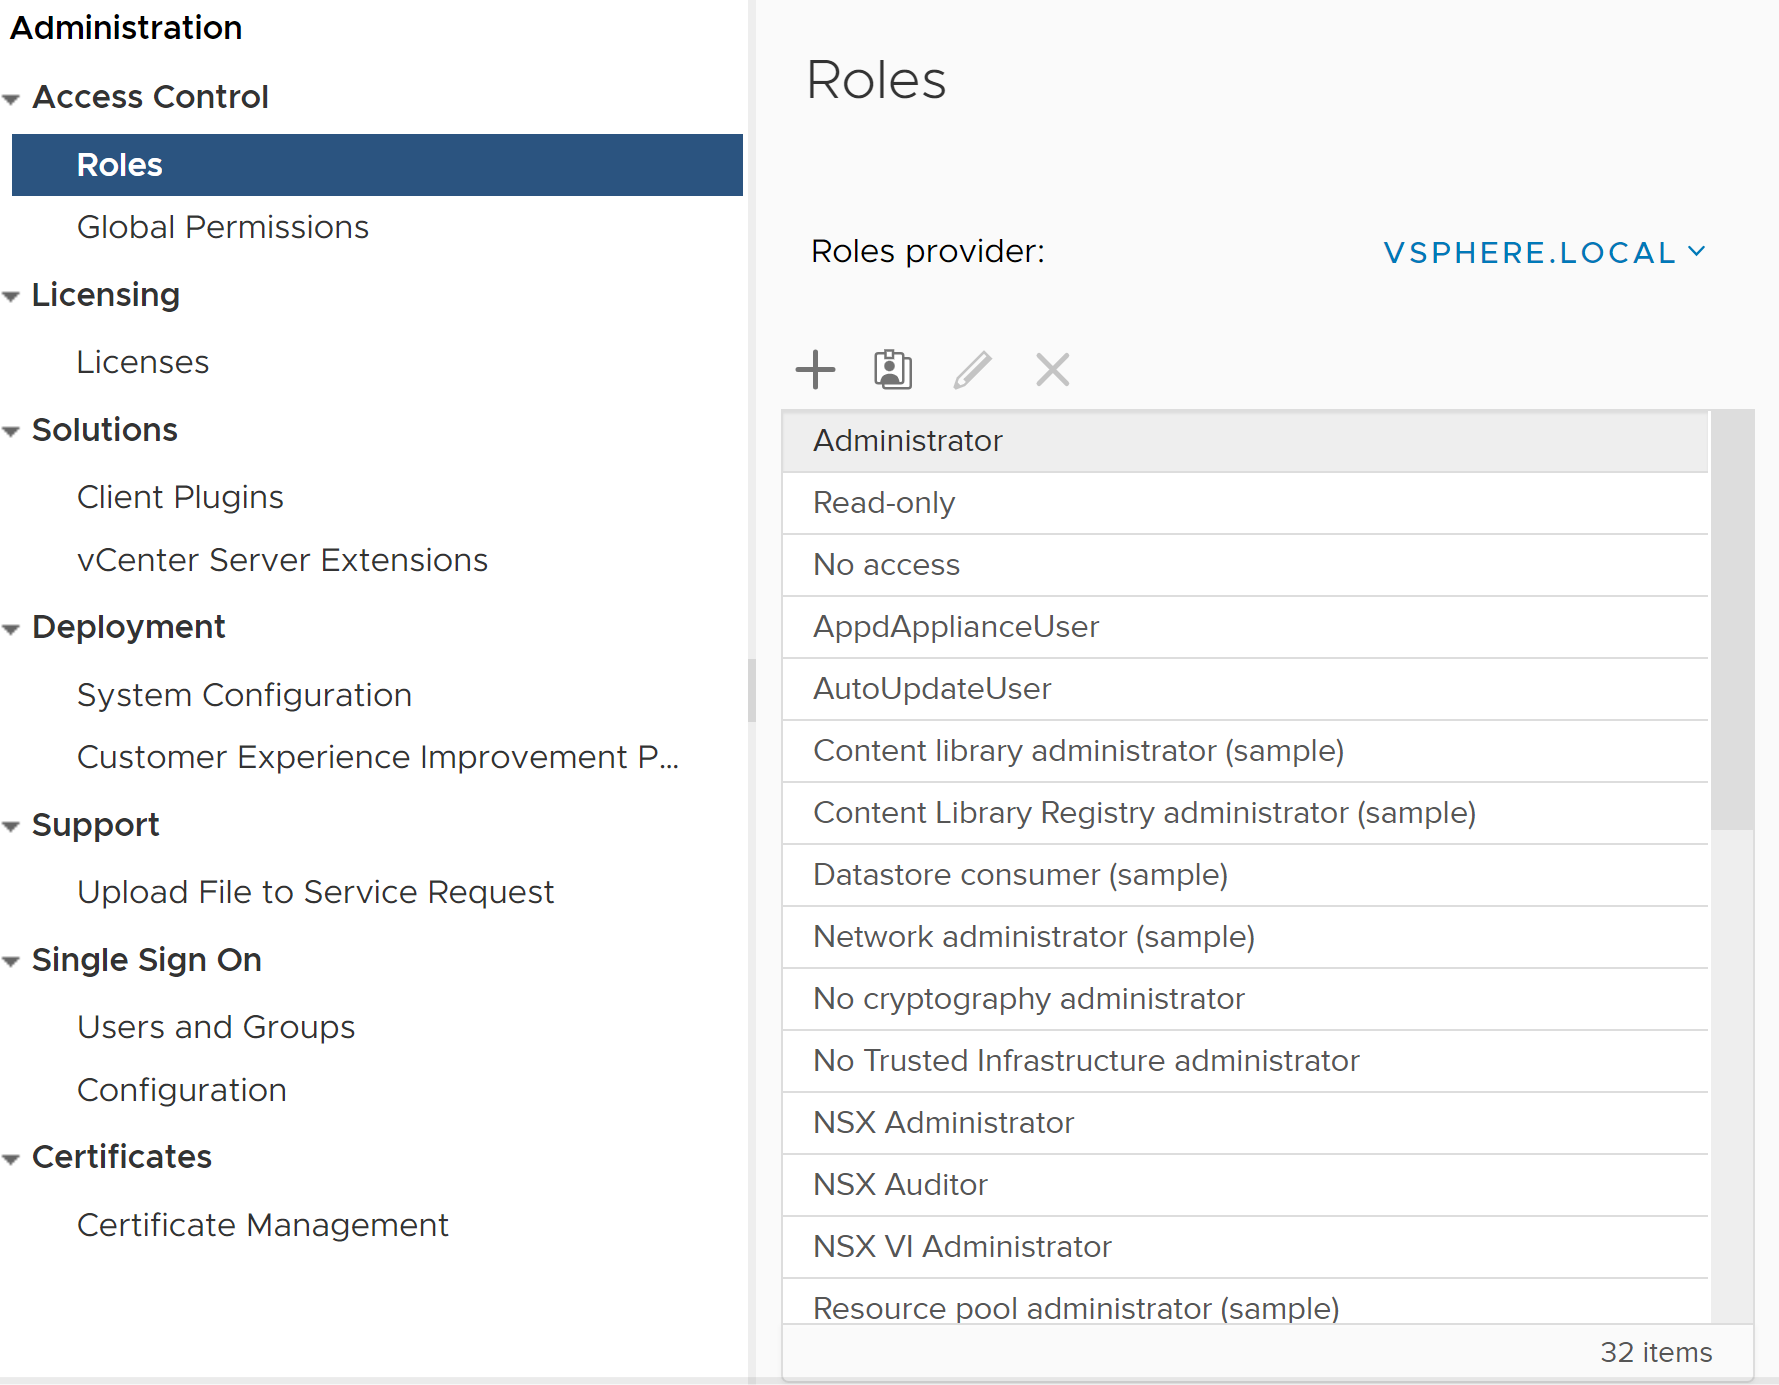 This screenshots shows how to create a role and assign permissions.